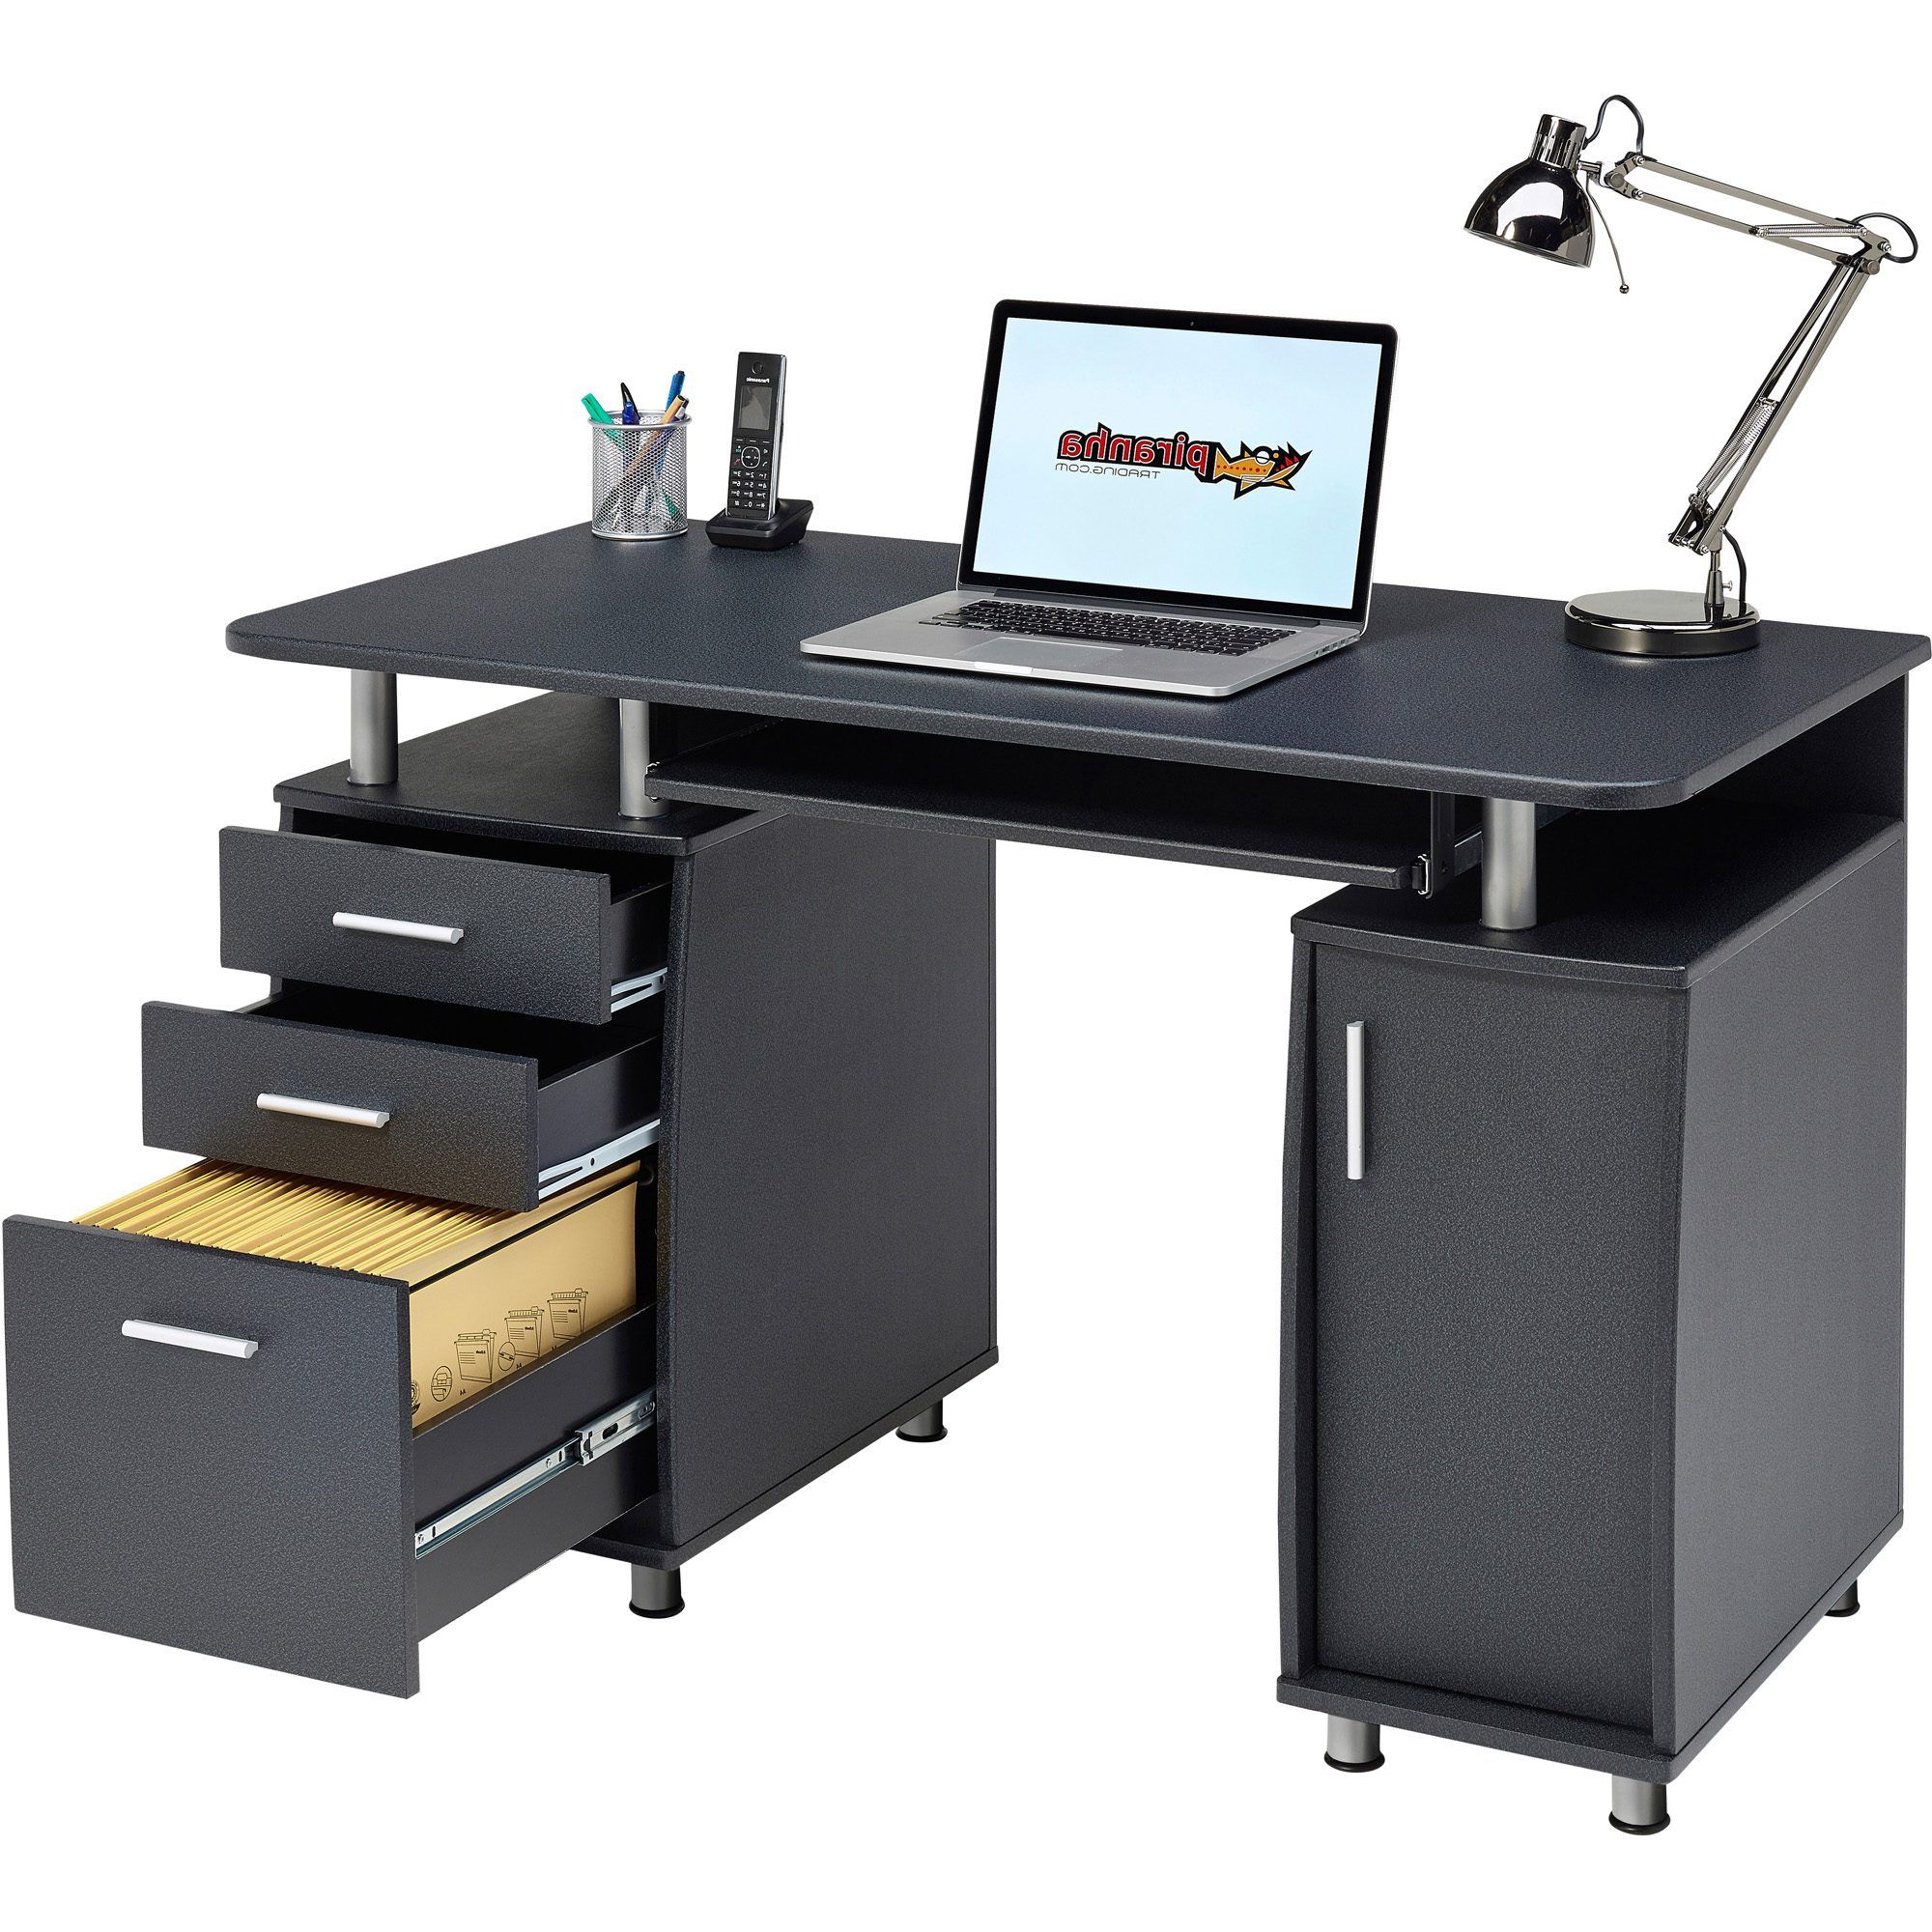 Emperor Desk With Cupboard & Drawers Graphite Black Regarding Well Known Graphite Convertible Desks With Keyboard Shelf (View 9 of 15)